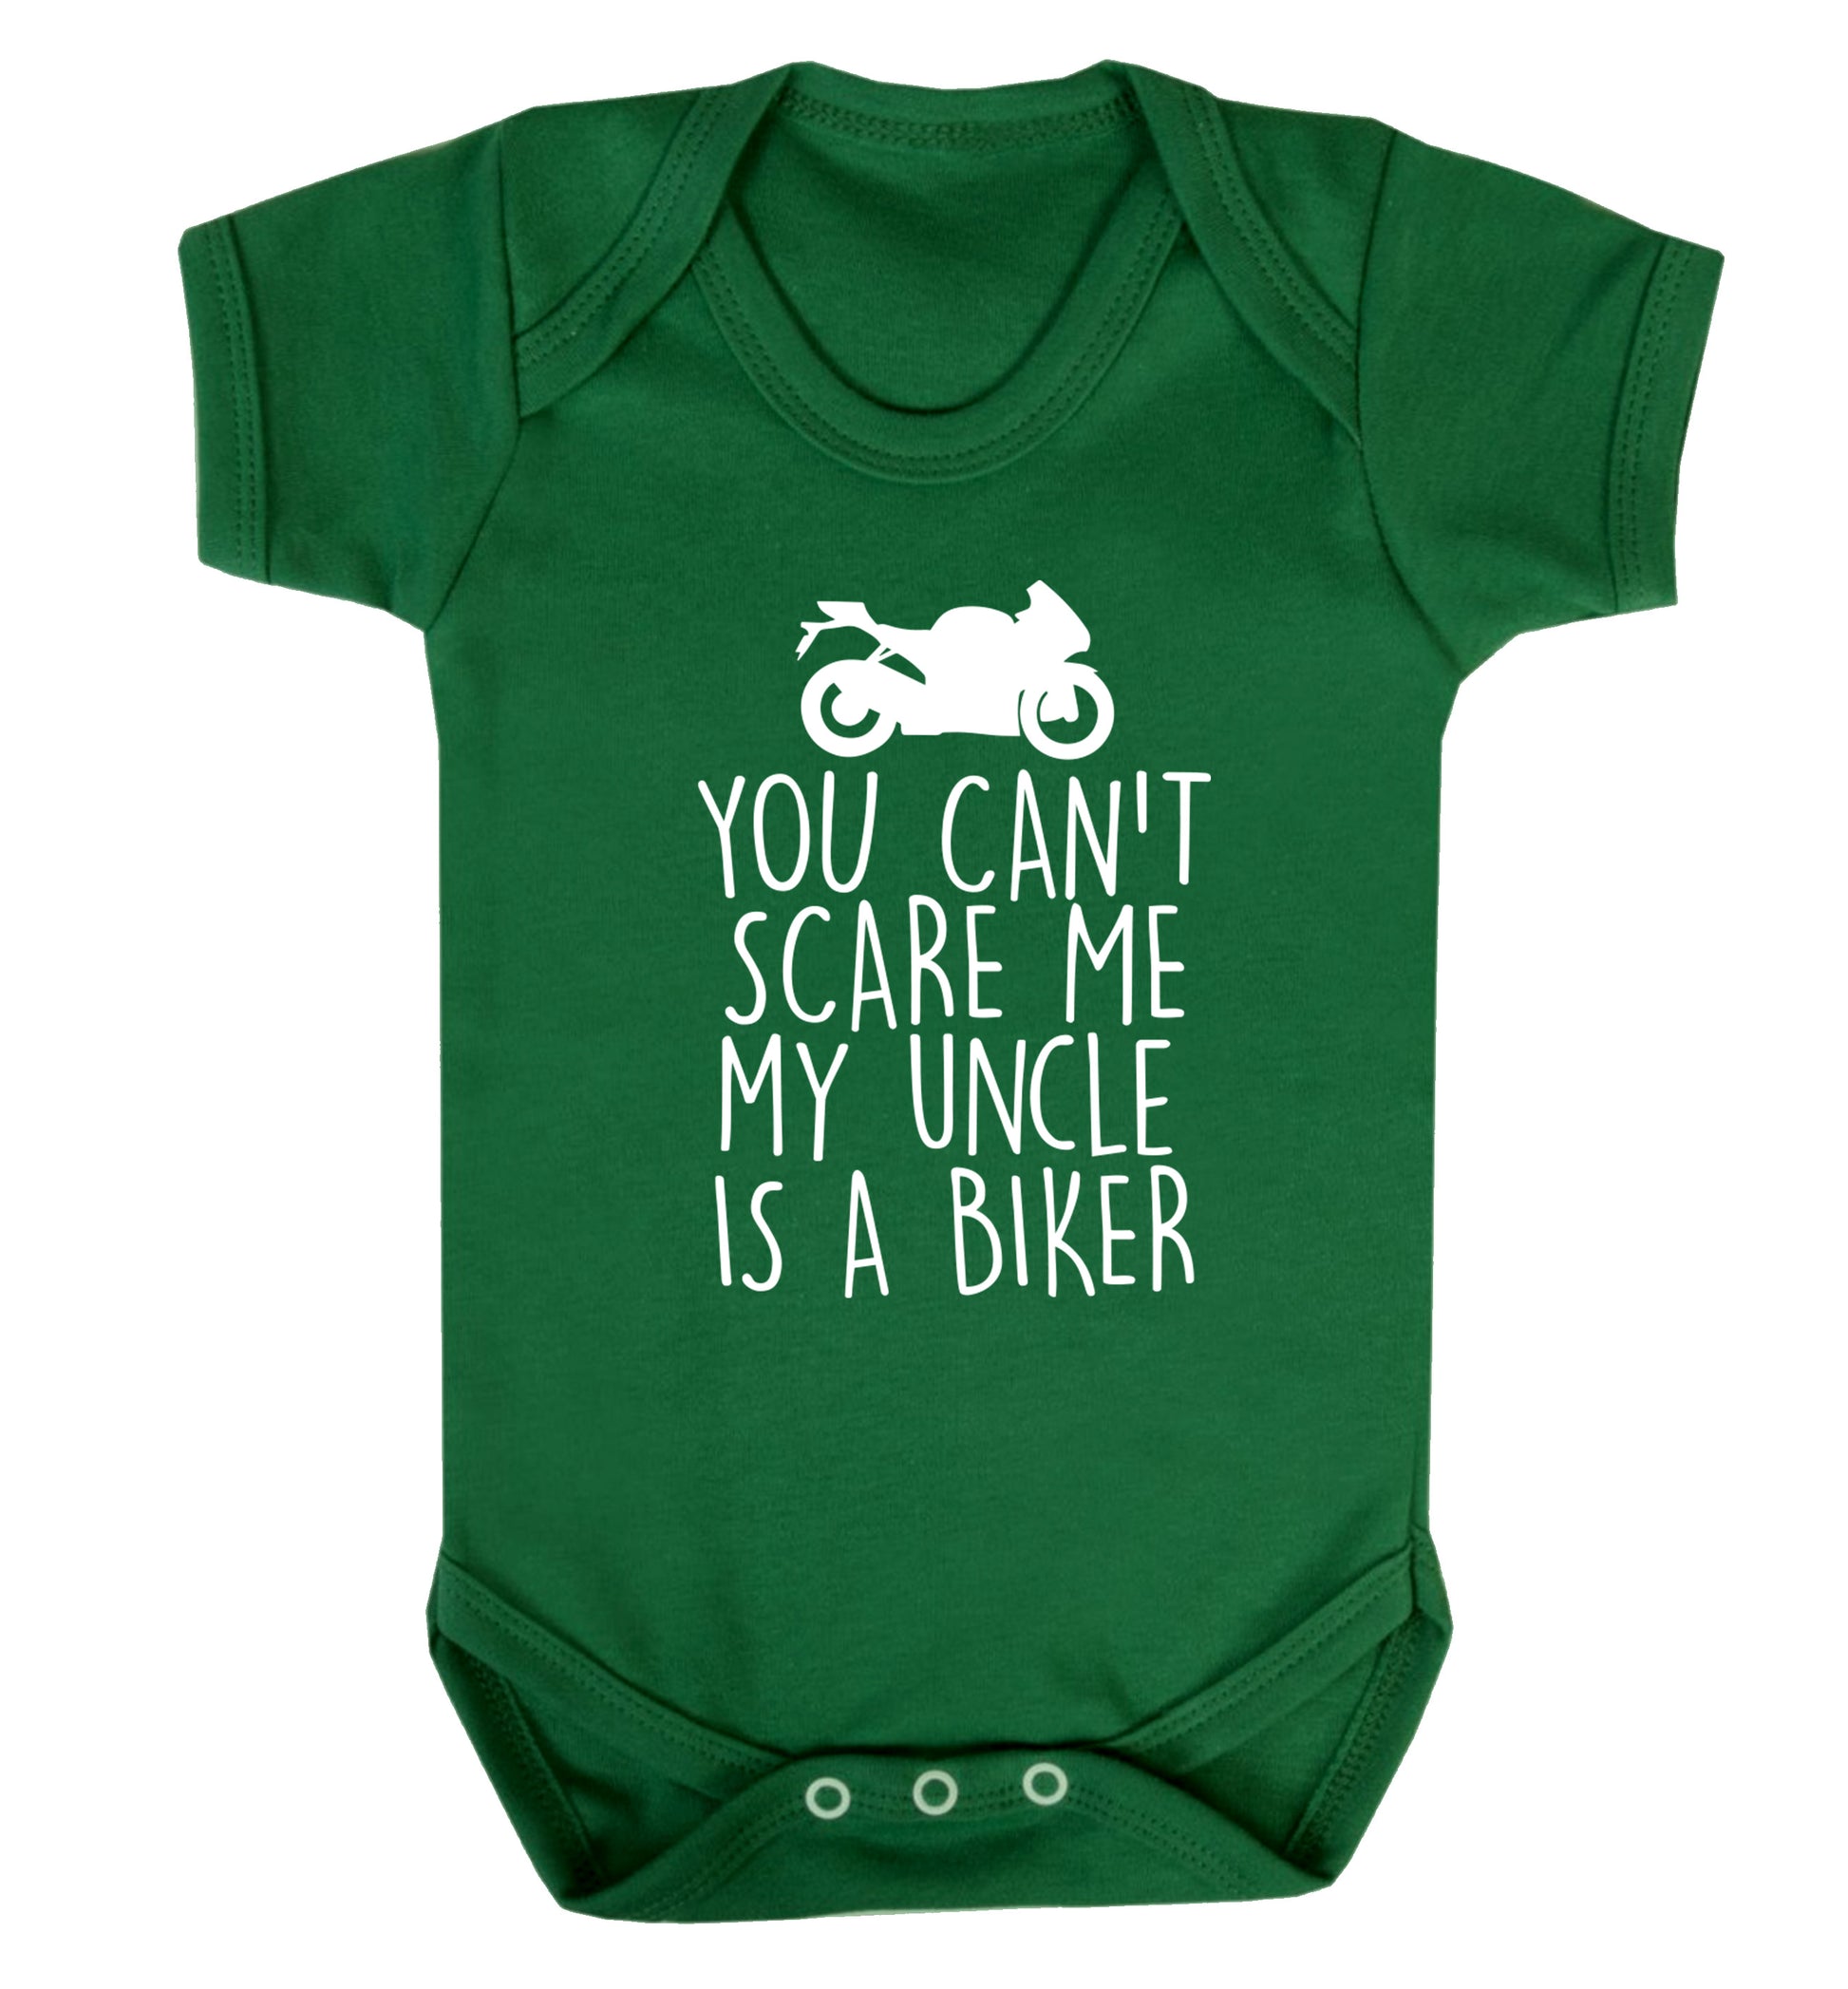 You can't scare me my uncle is a biker Baby Vest green 18-24 months